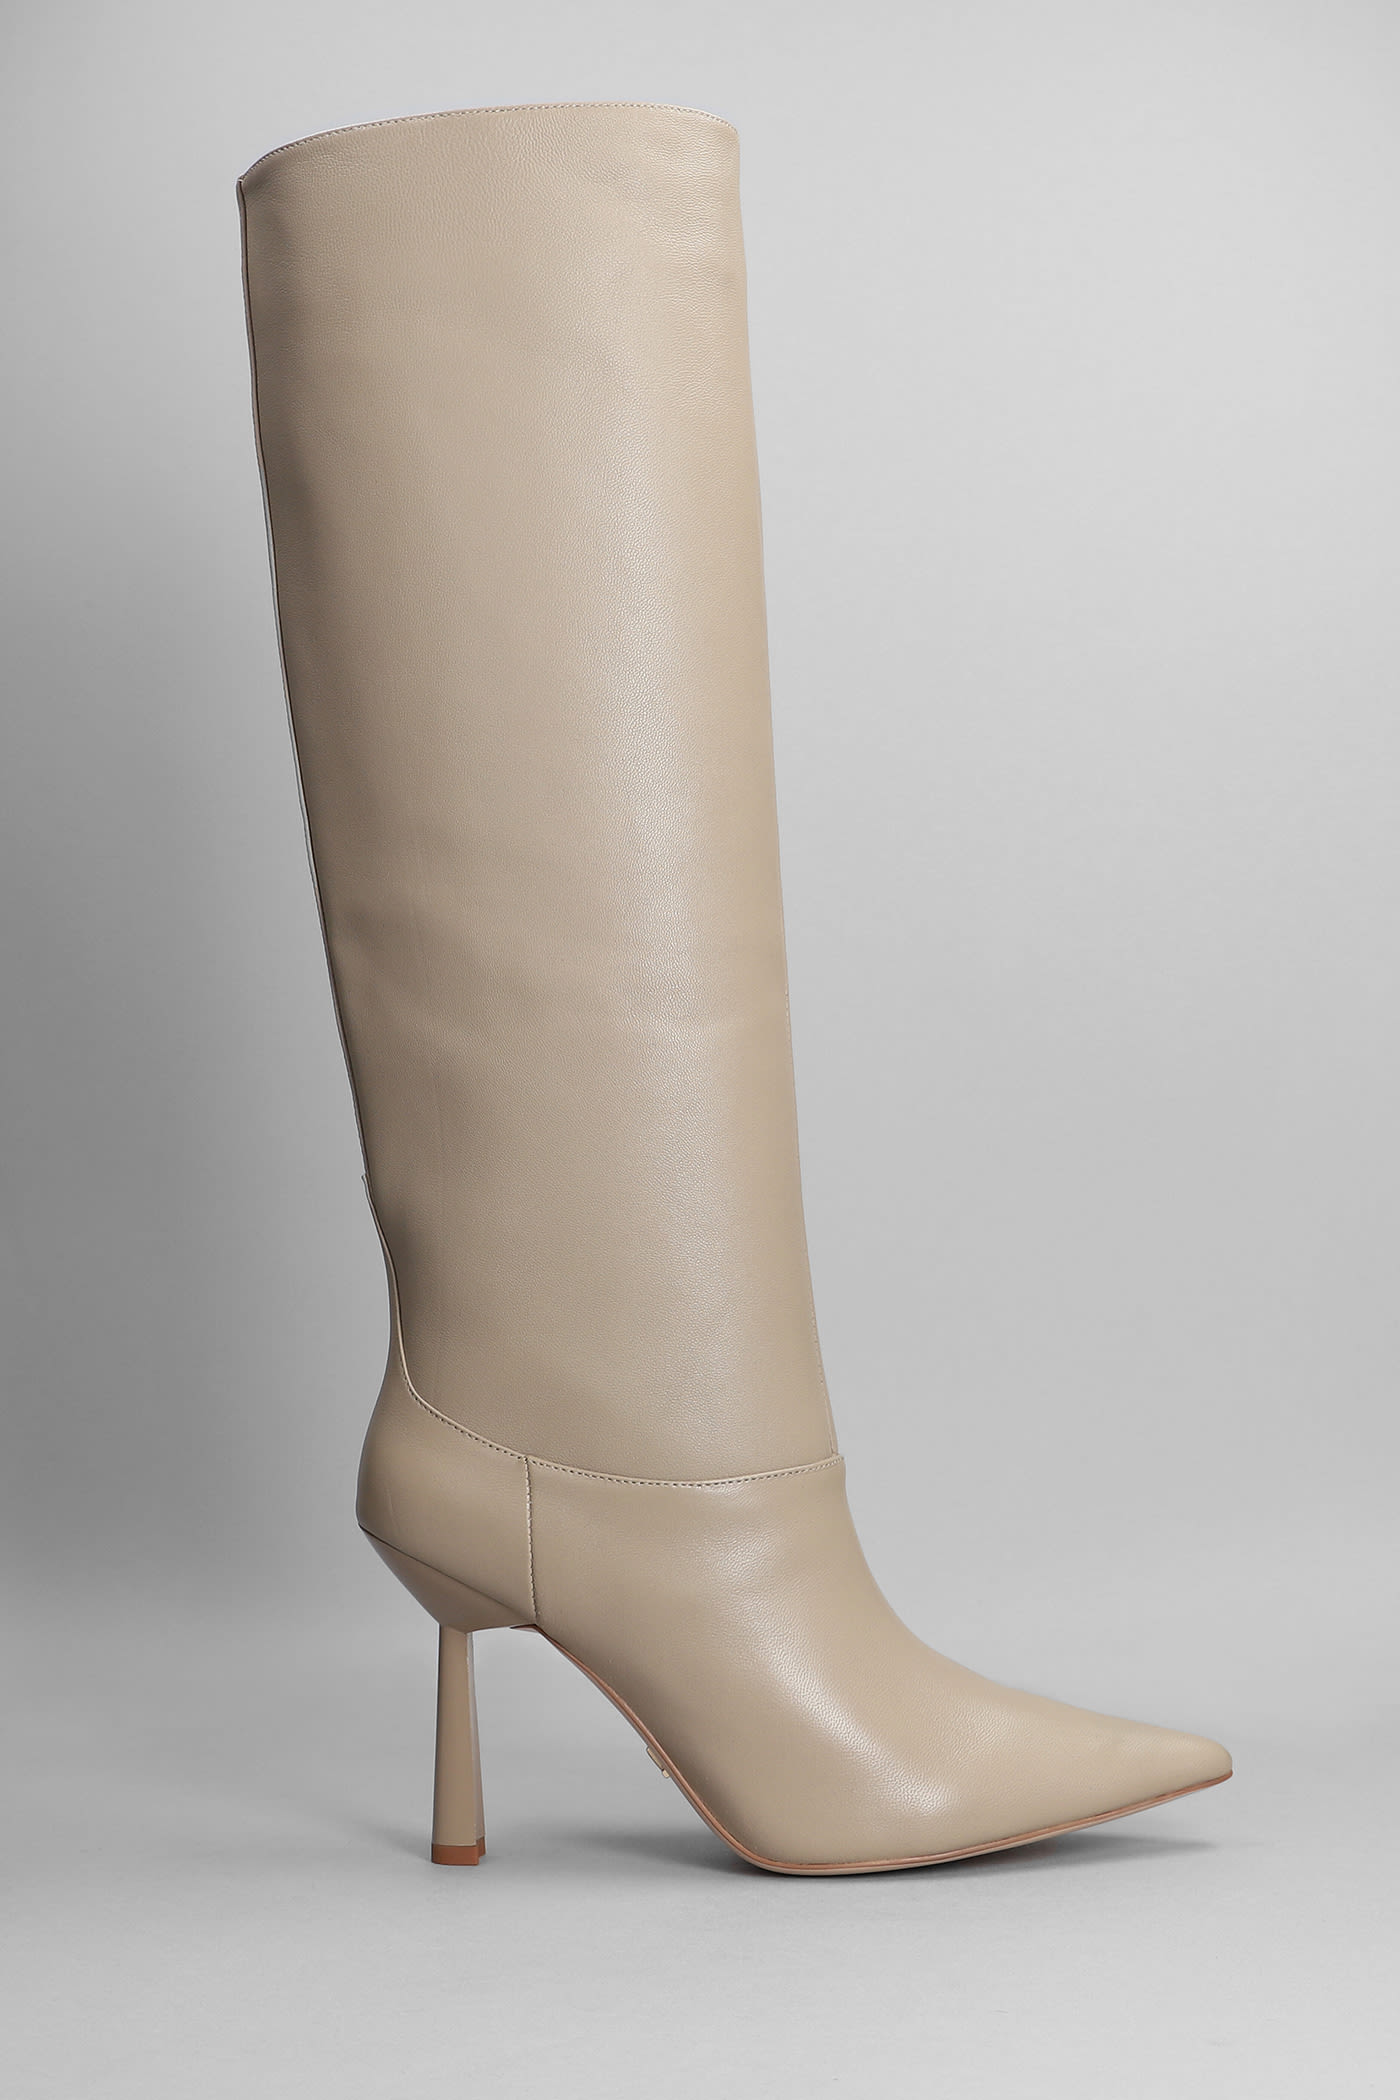 Lola Cruz High Heels Boots In Taupe Leather